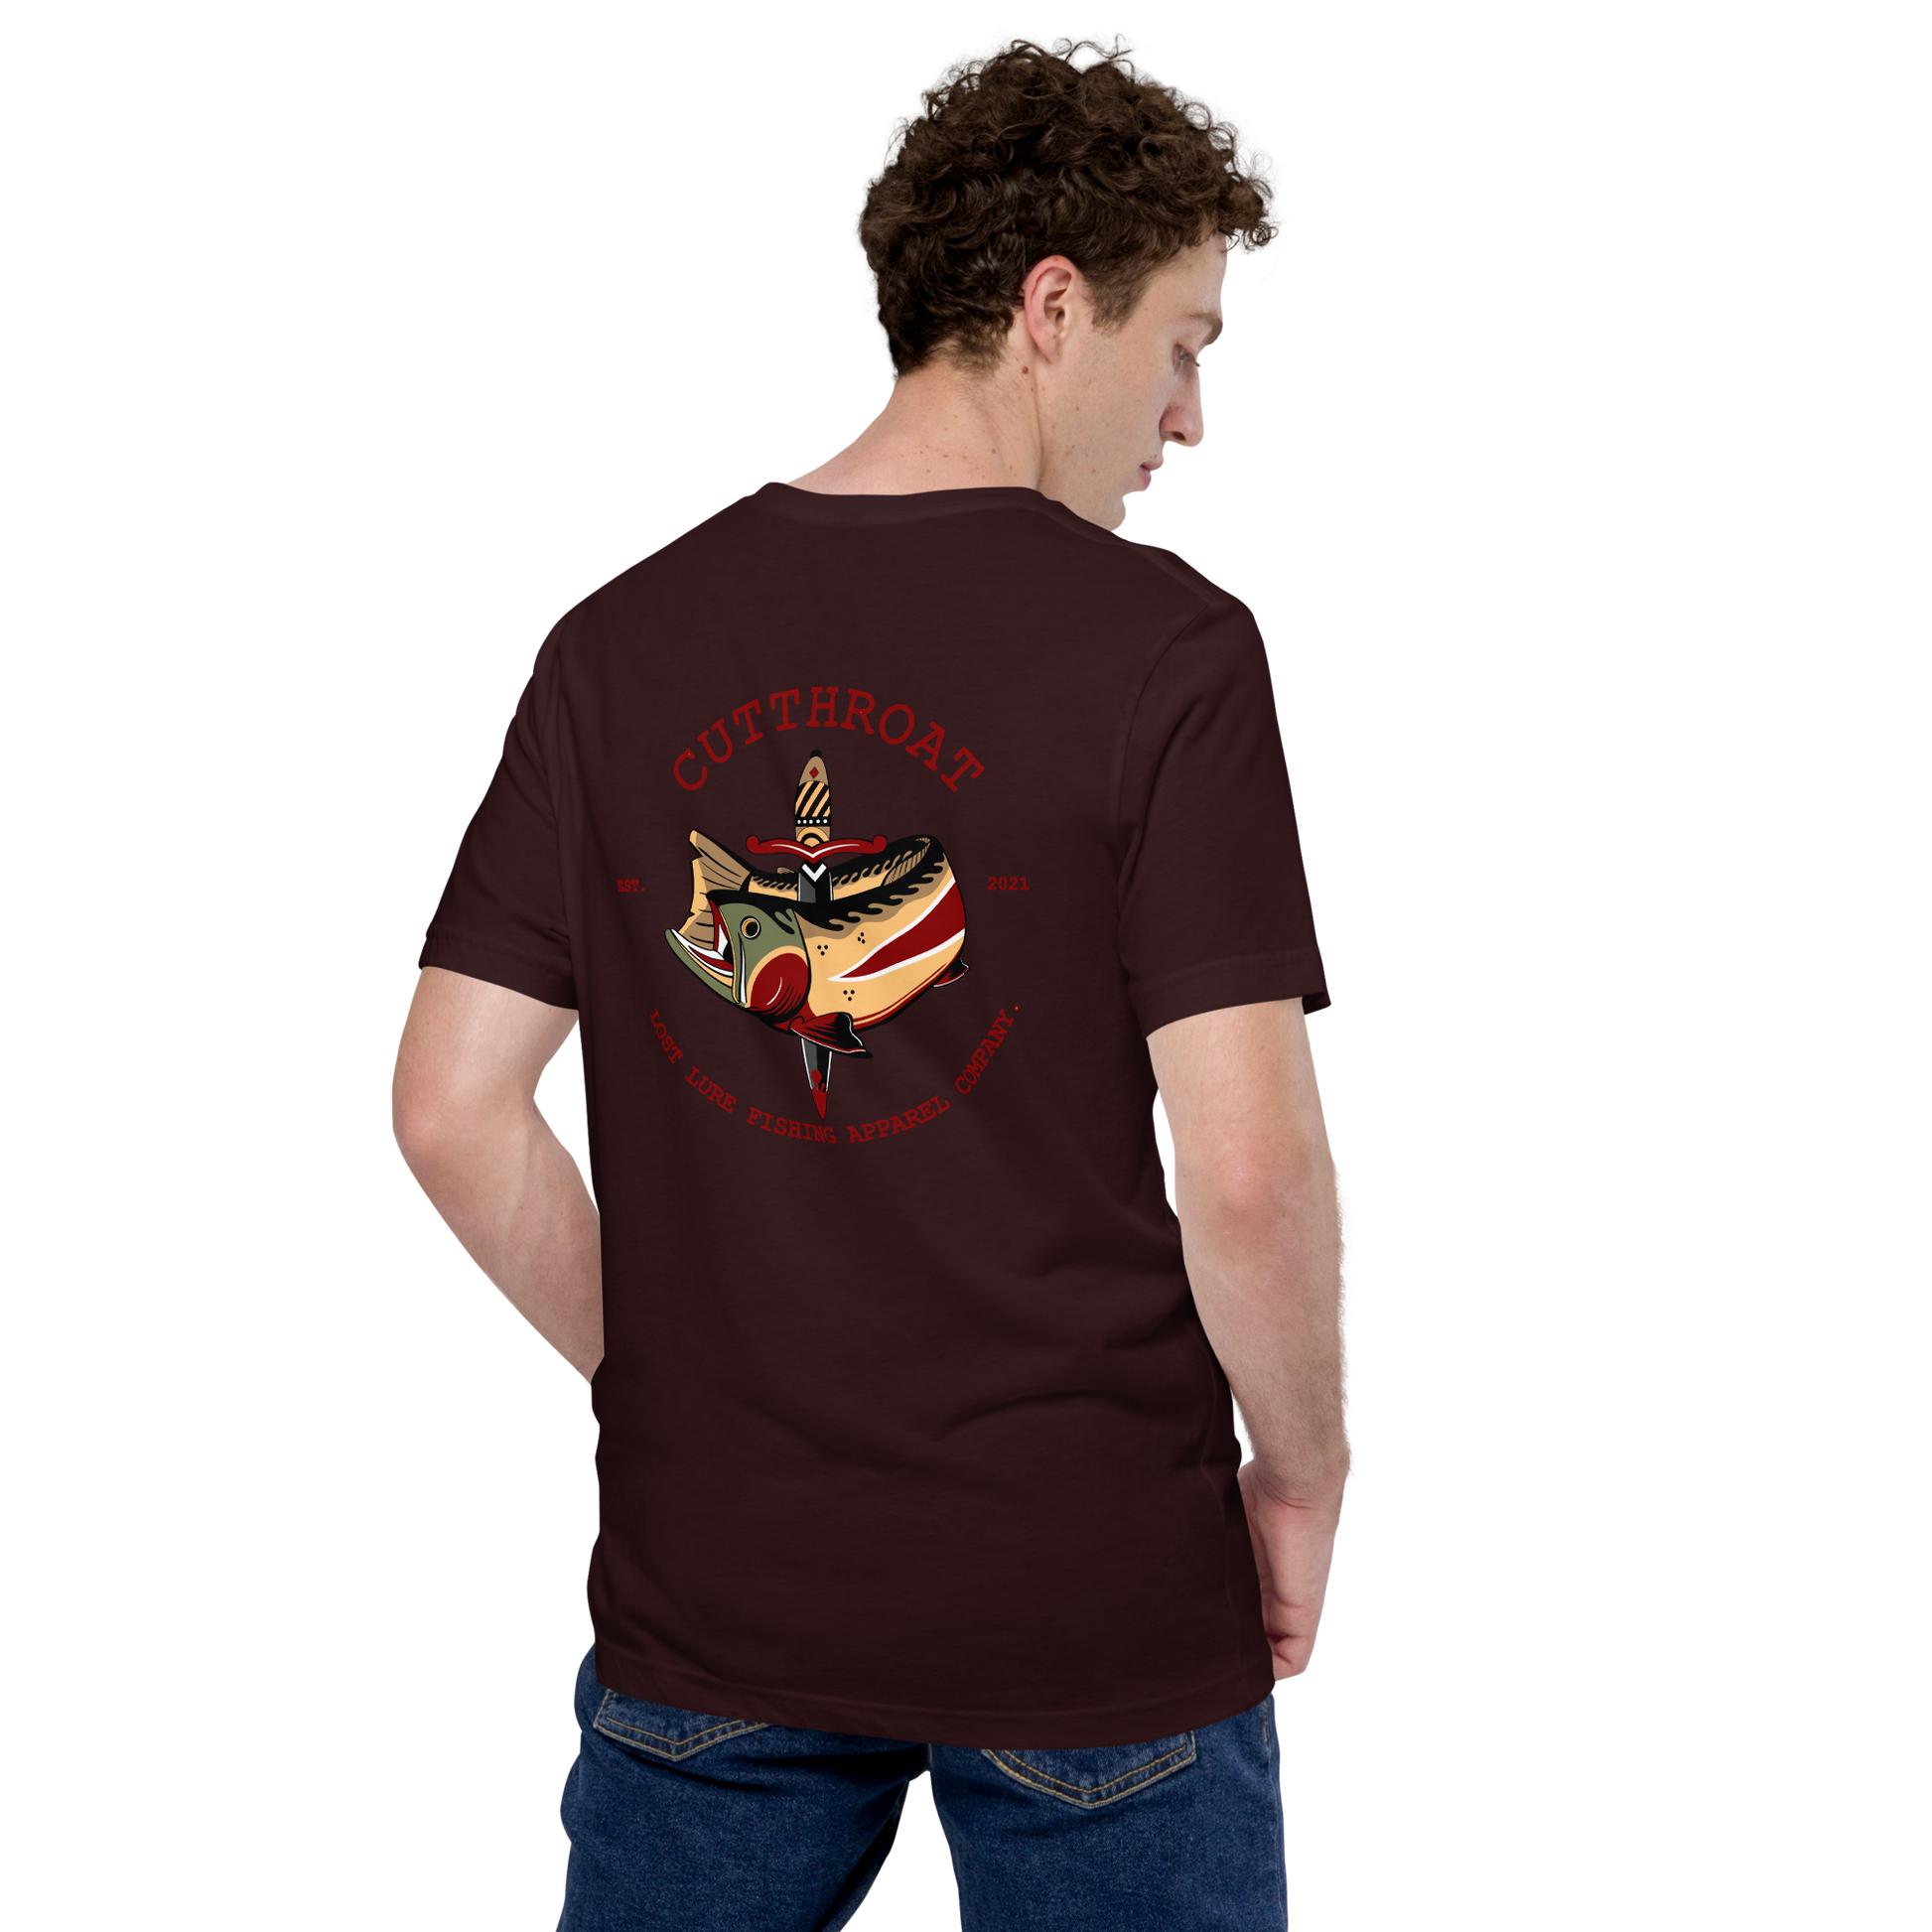 Cutthroat Trout fishing shirt. It’s an American traditional style design with a cutthroat trout and a dagger. The shirt reads Cutthroat trout, est. 2021, lost lure fishing apparel company. The front of the shirt has the lost lure logo. Dark maroon shirt, back side of model wearing shirt.